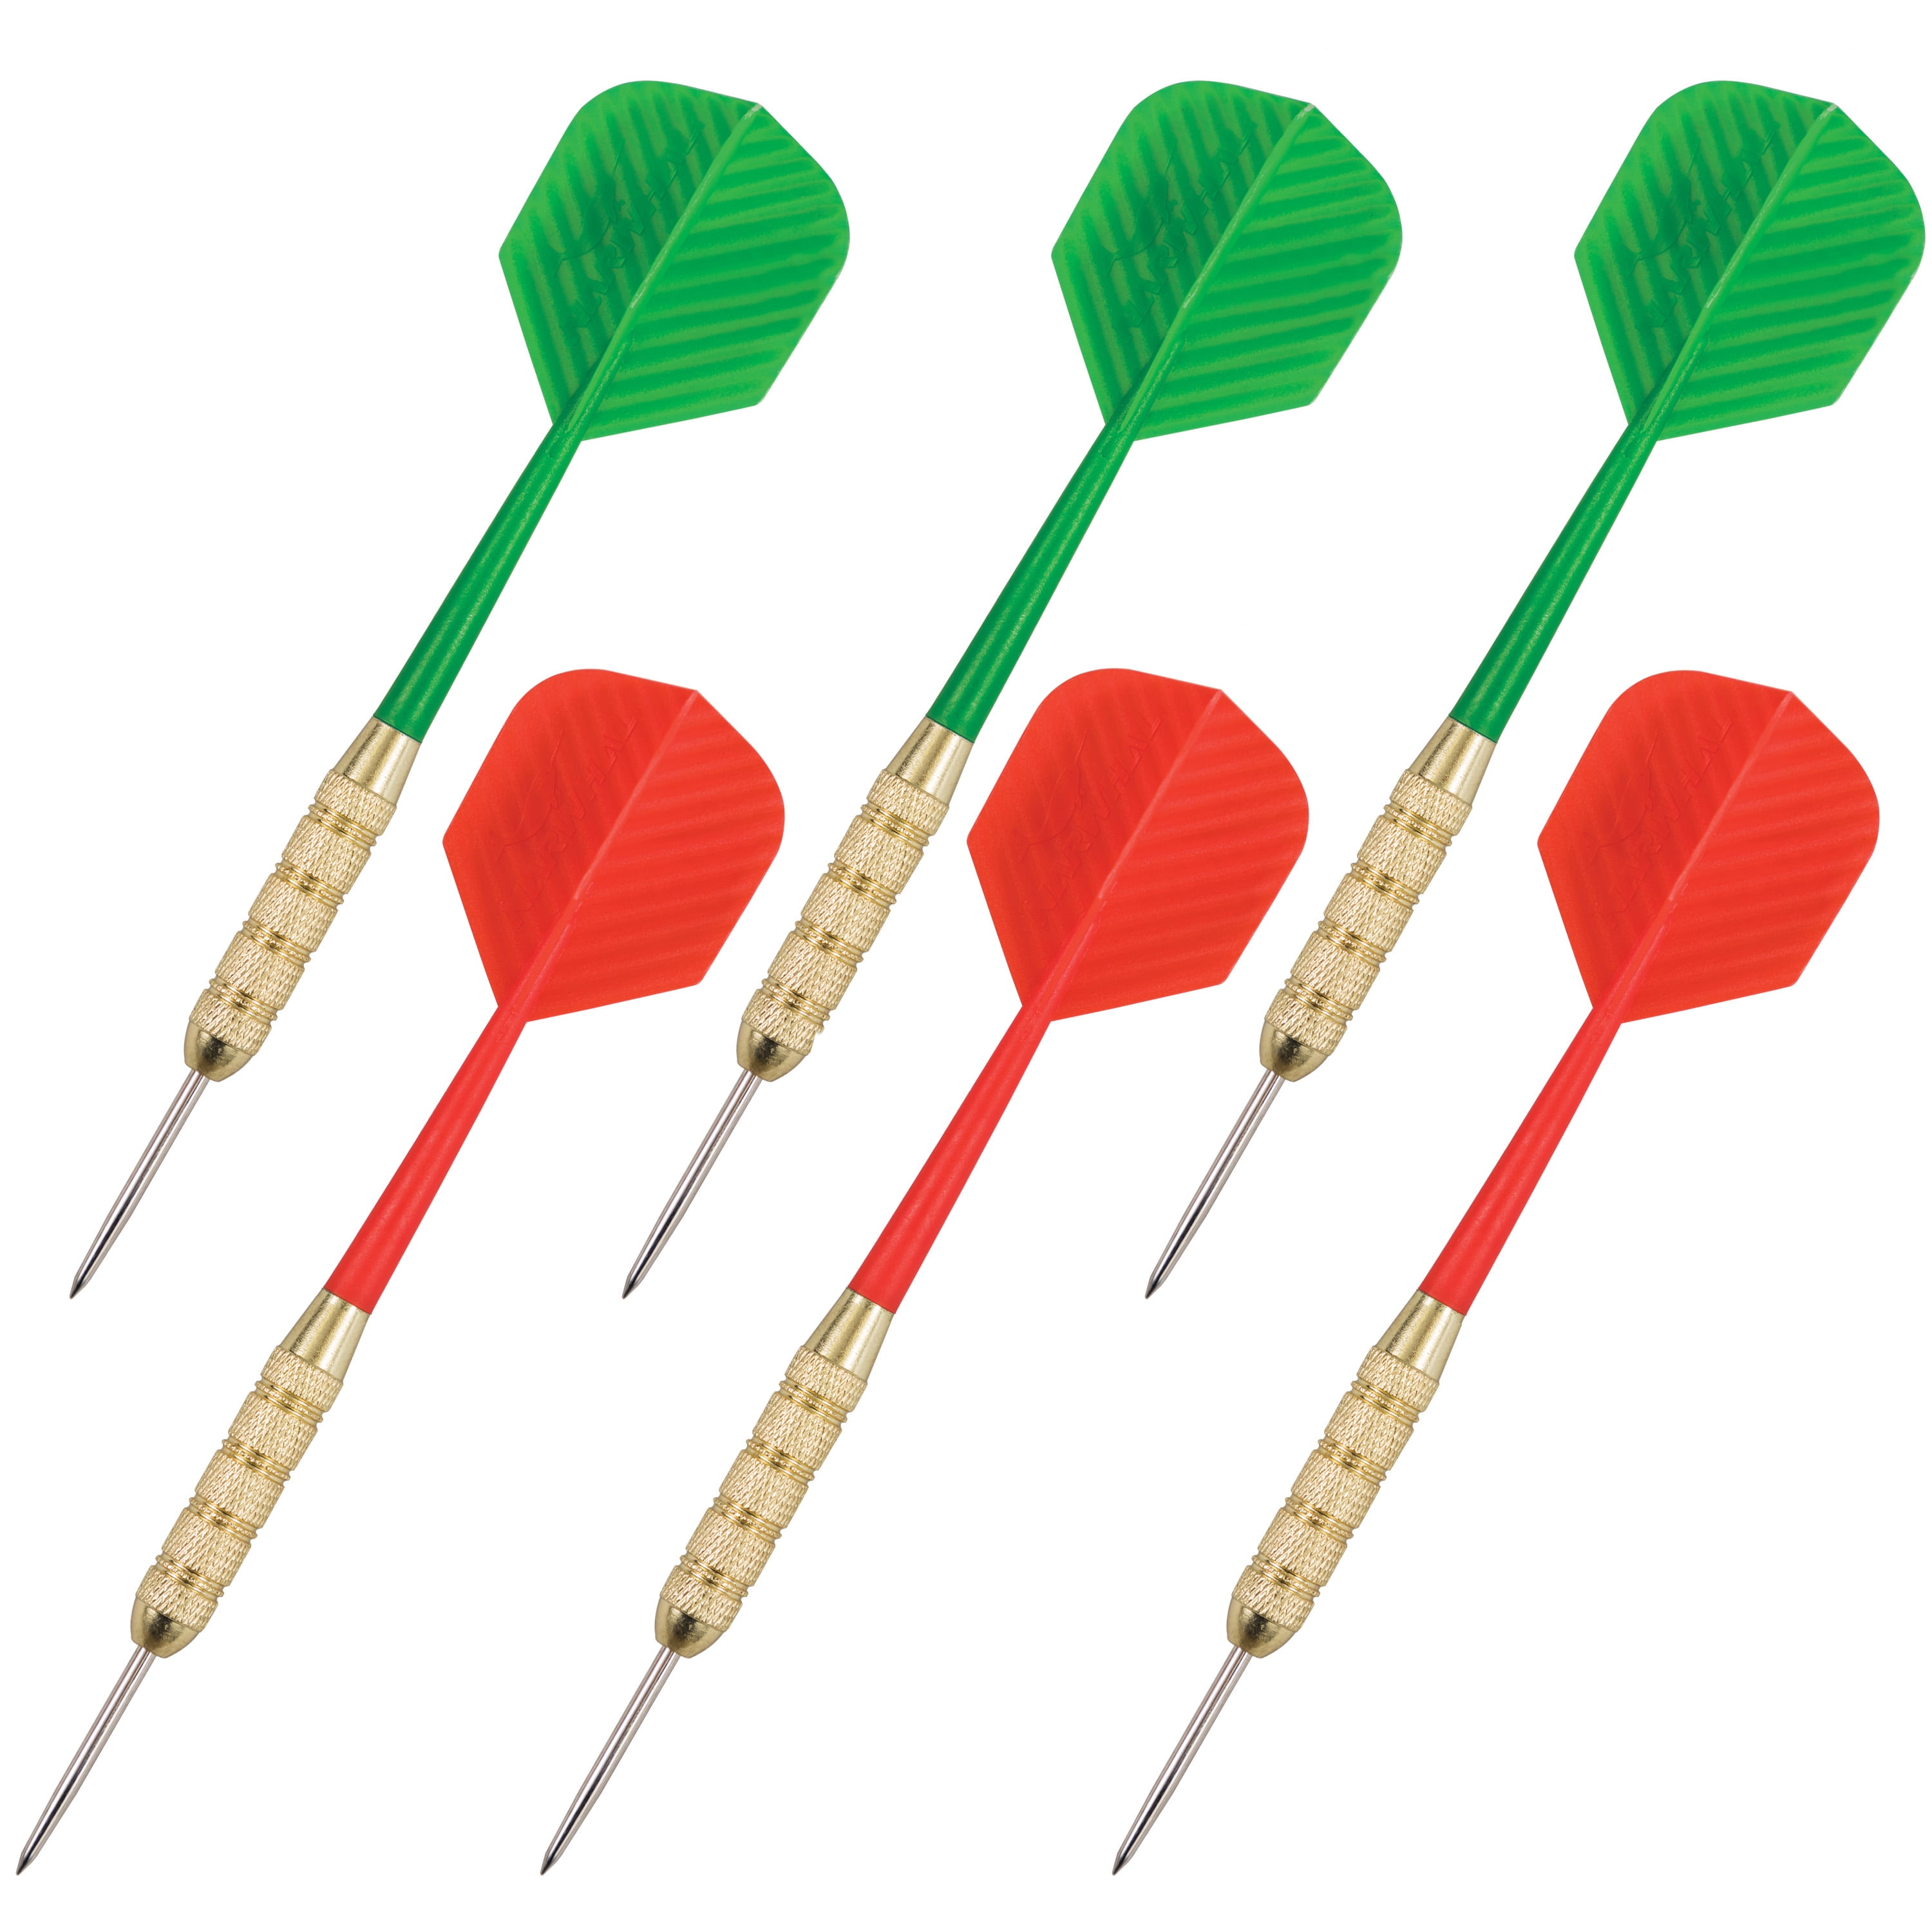 NARWHAL Recreational 18g Steel Tip Darts, 6 pack of 5 in. Darts